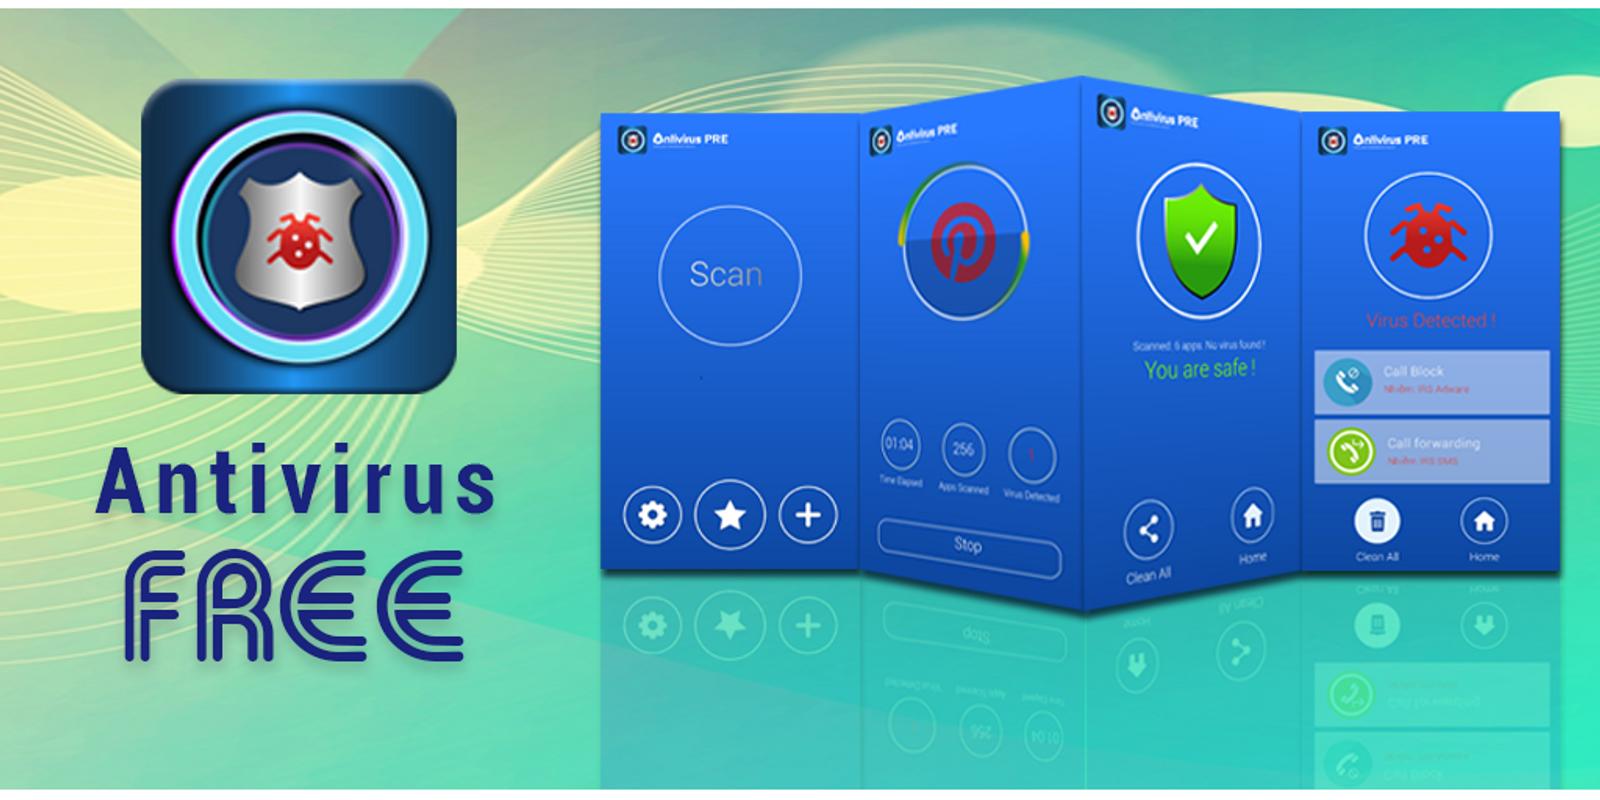 Download Antivirus For Android 2.3.6 Apk